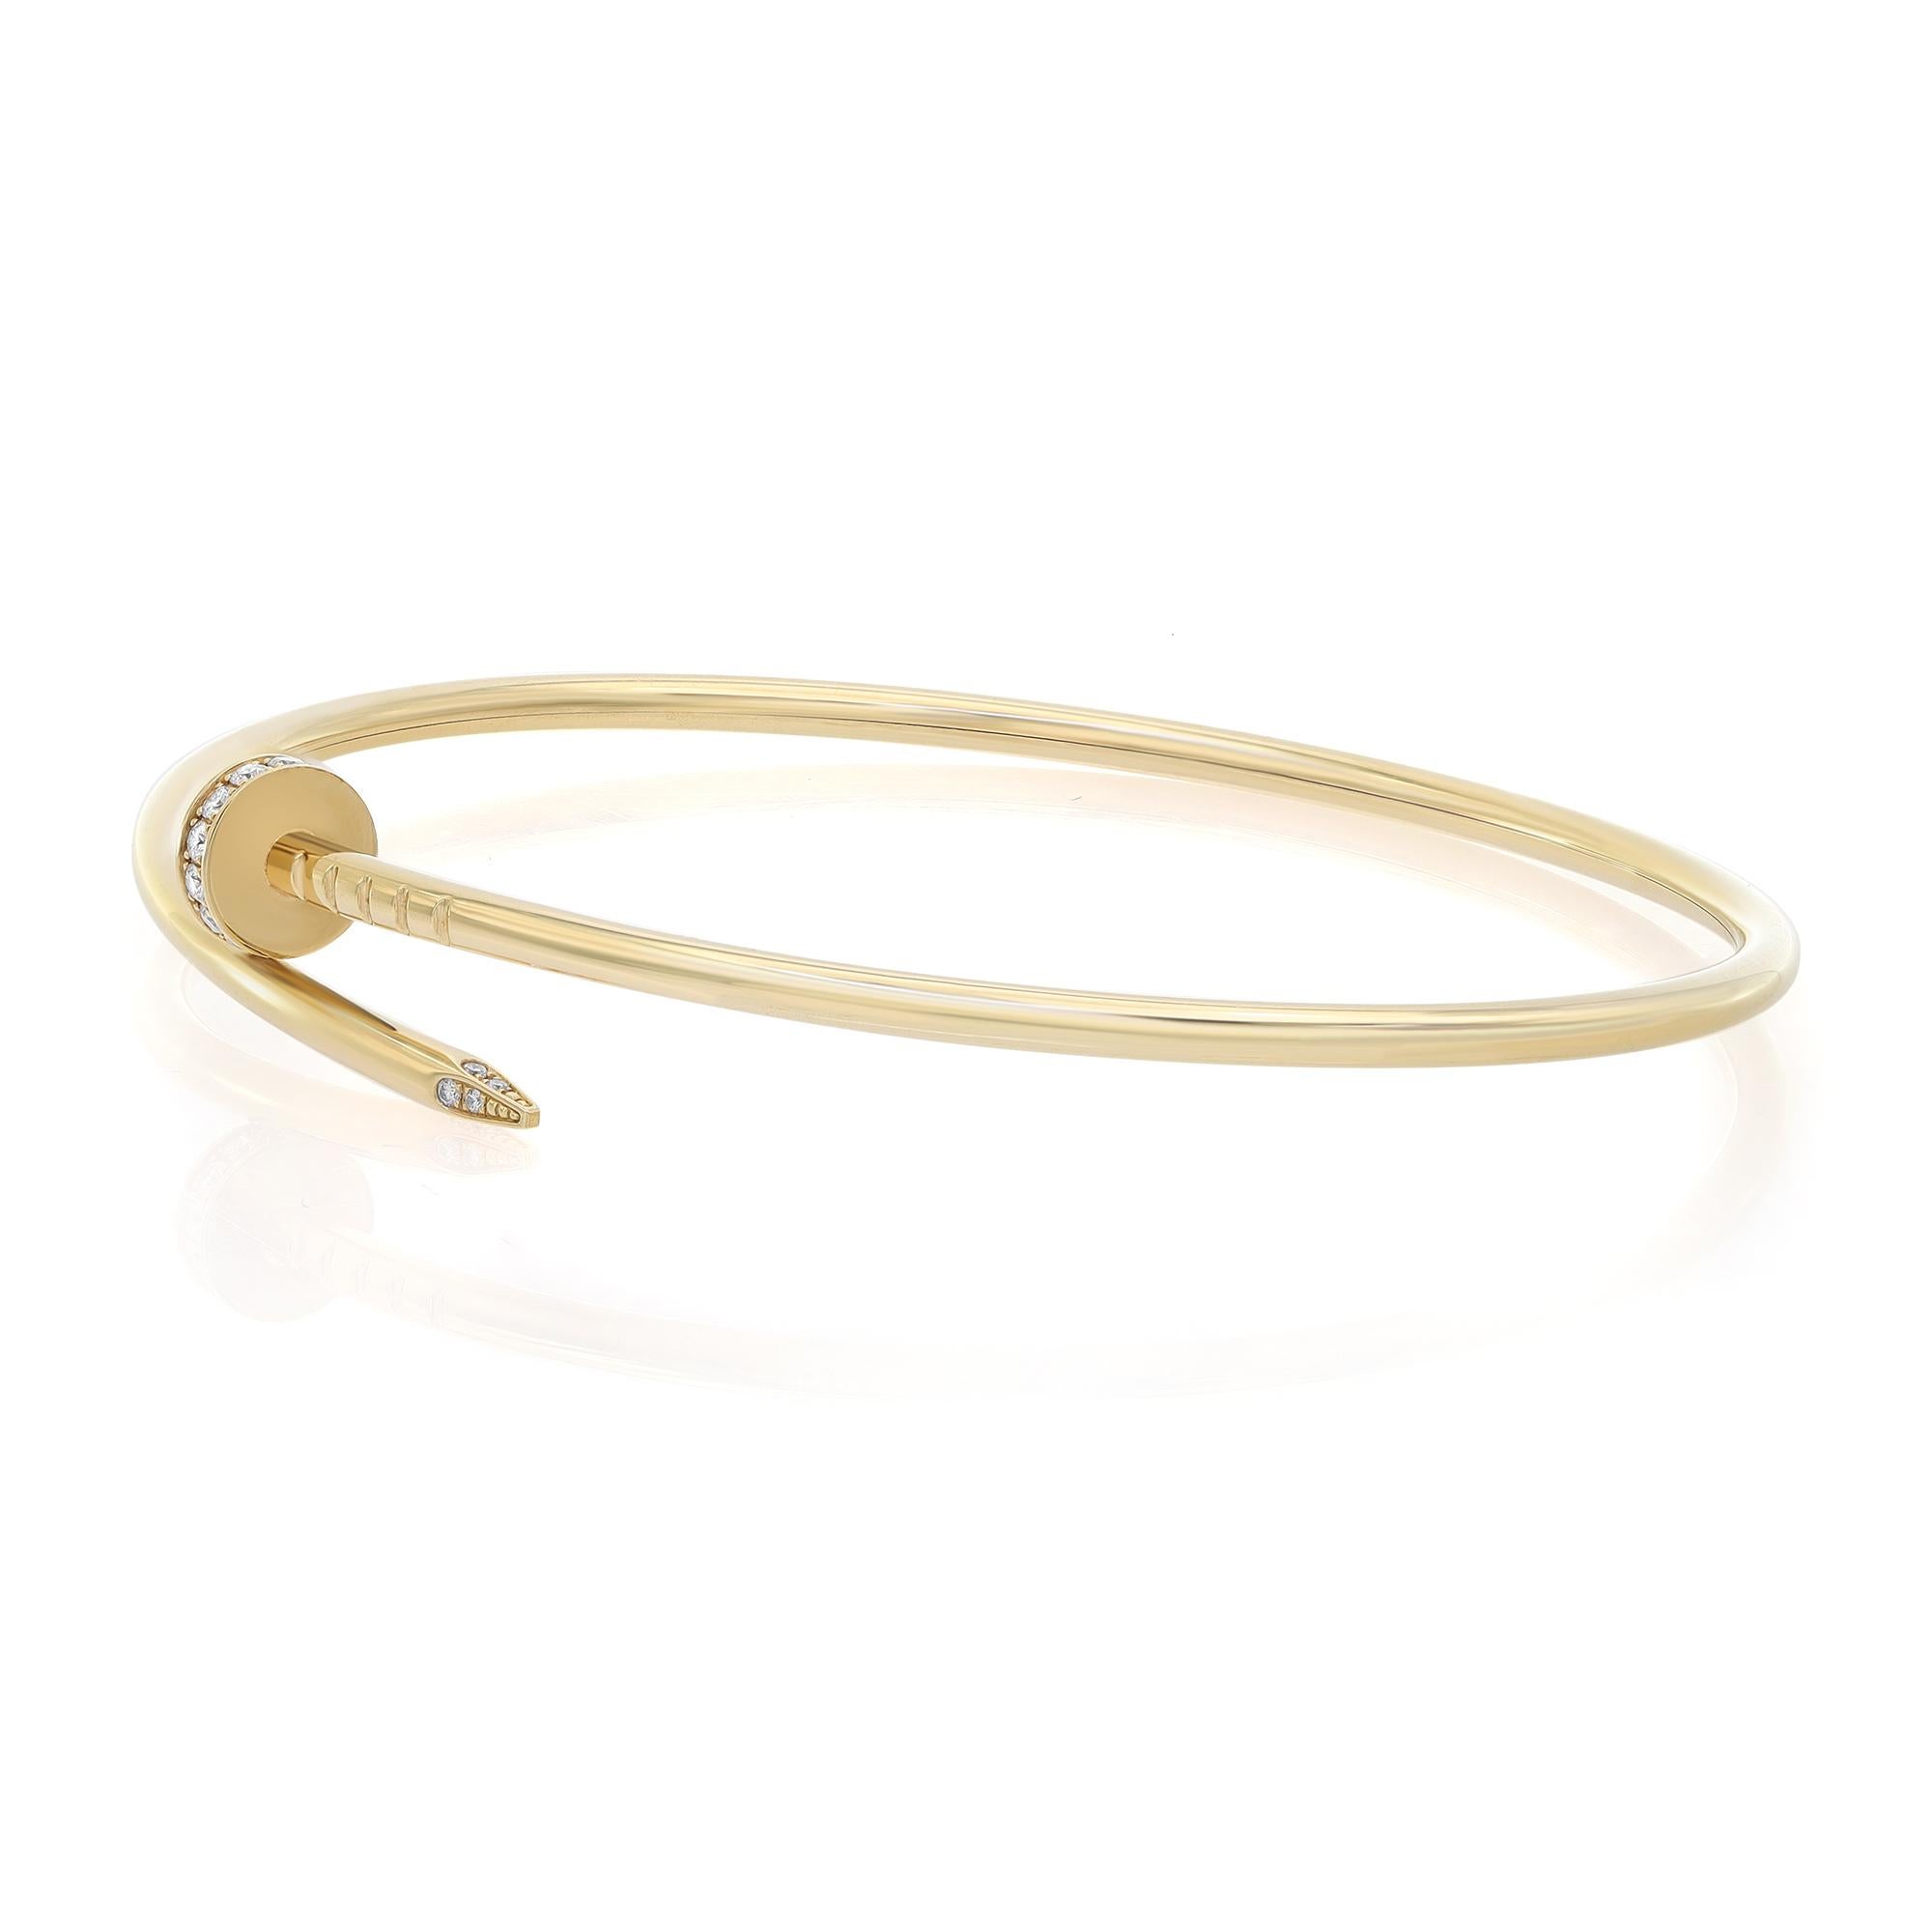 Cartier Juste un Clou bracelet, small model, crafted in 18K yellow gold. Set with 20 round brilliant-cut diamonds totaling 0.18 carat. Size 19. Width 2.5 mm. Unworn condition. Comes with an original box and paper.
